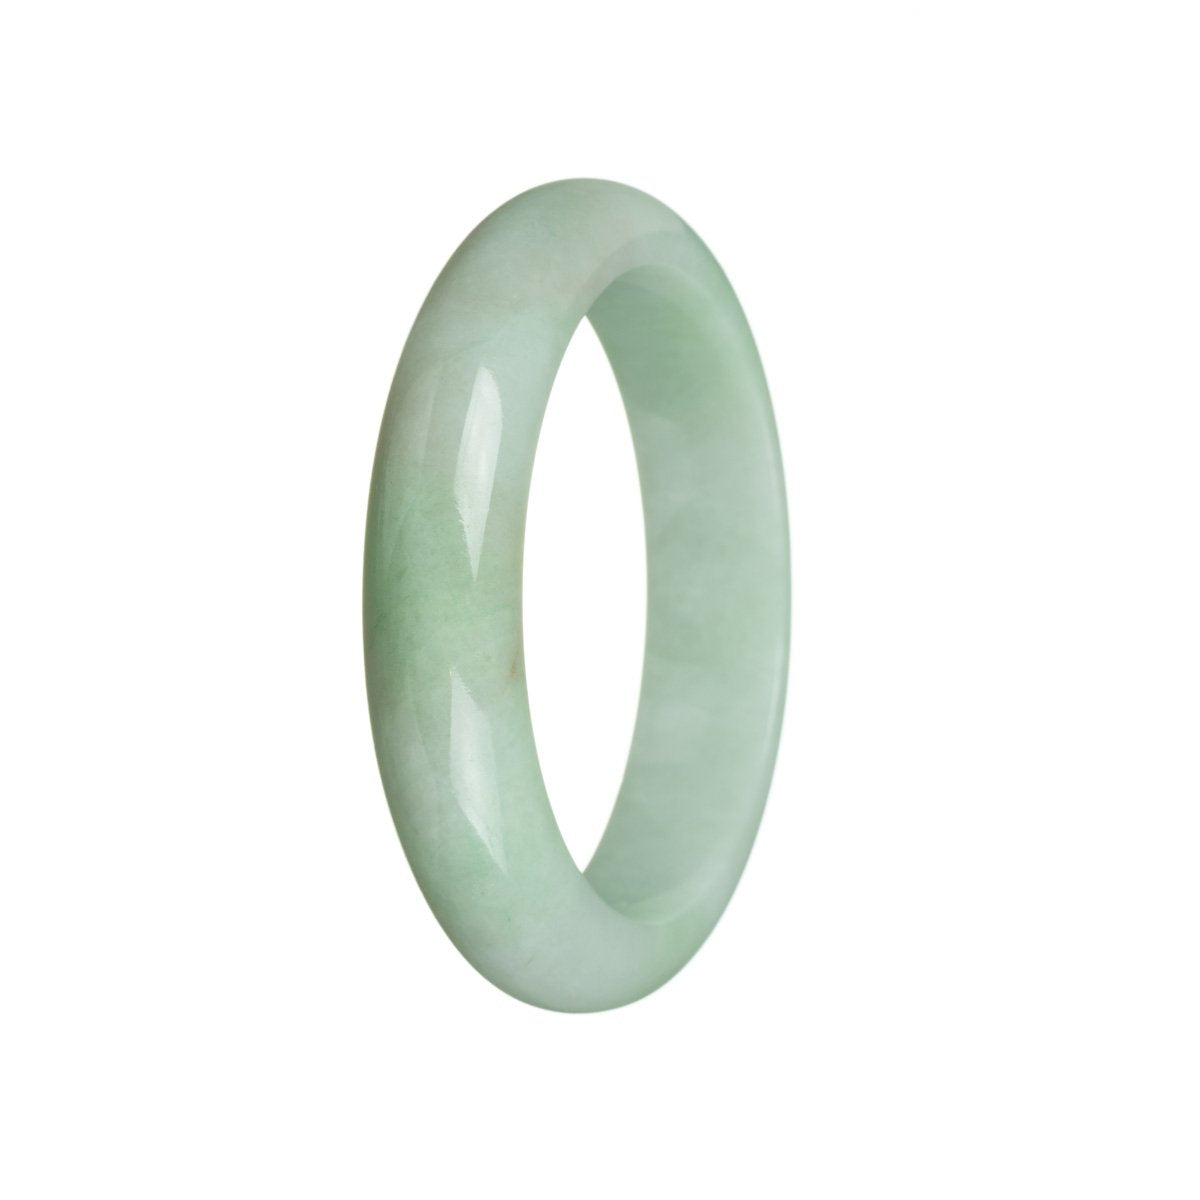 A half moon-shaped light green Burma Jade bracelet, untreated and made with real gemstones.